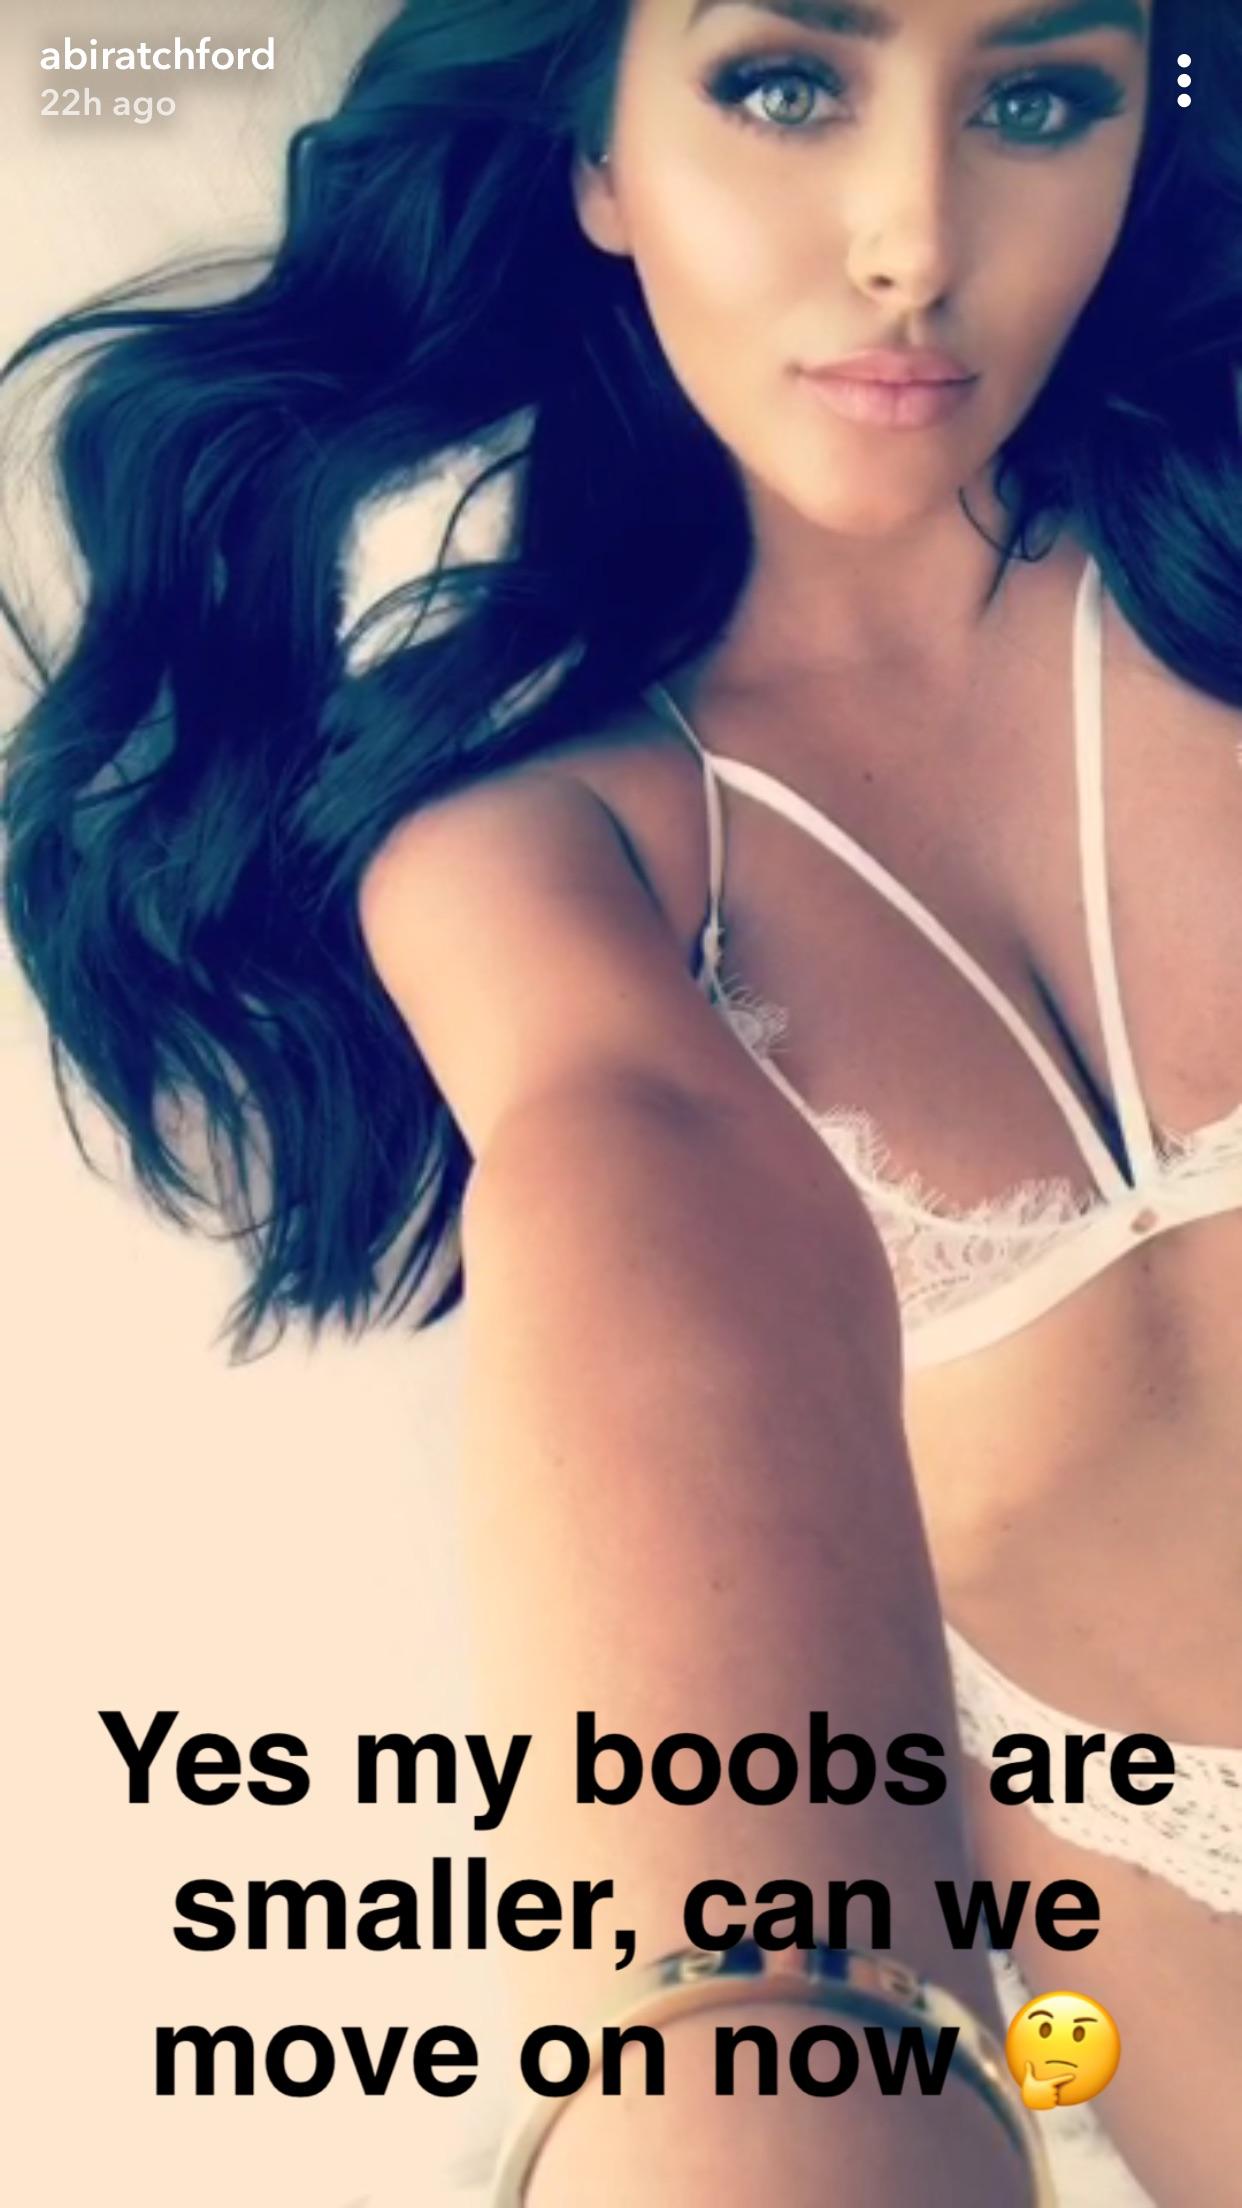 Her tits got smaller? Wtf : AbigailRatchford